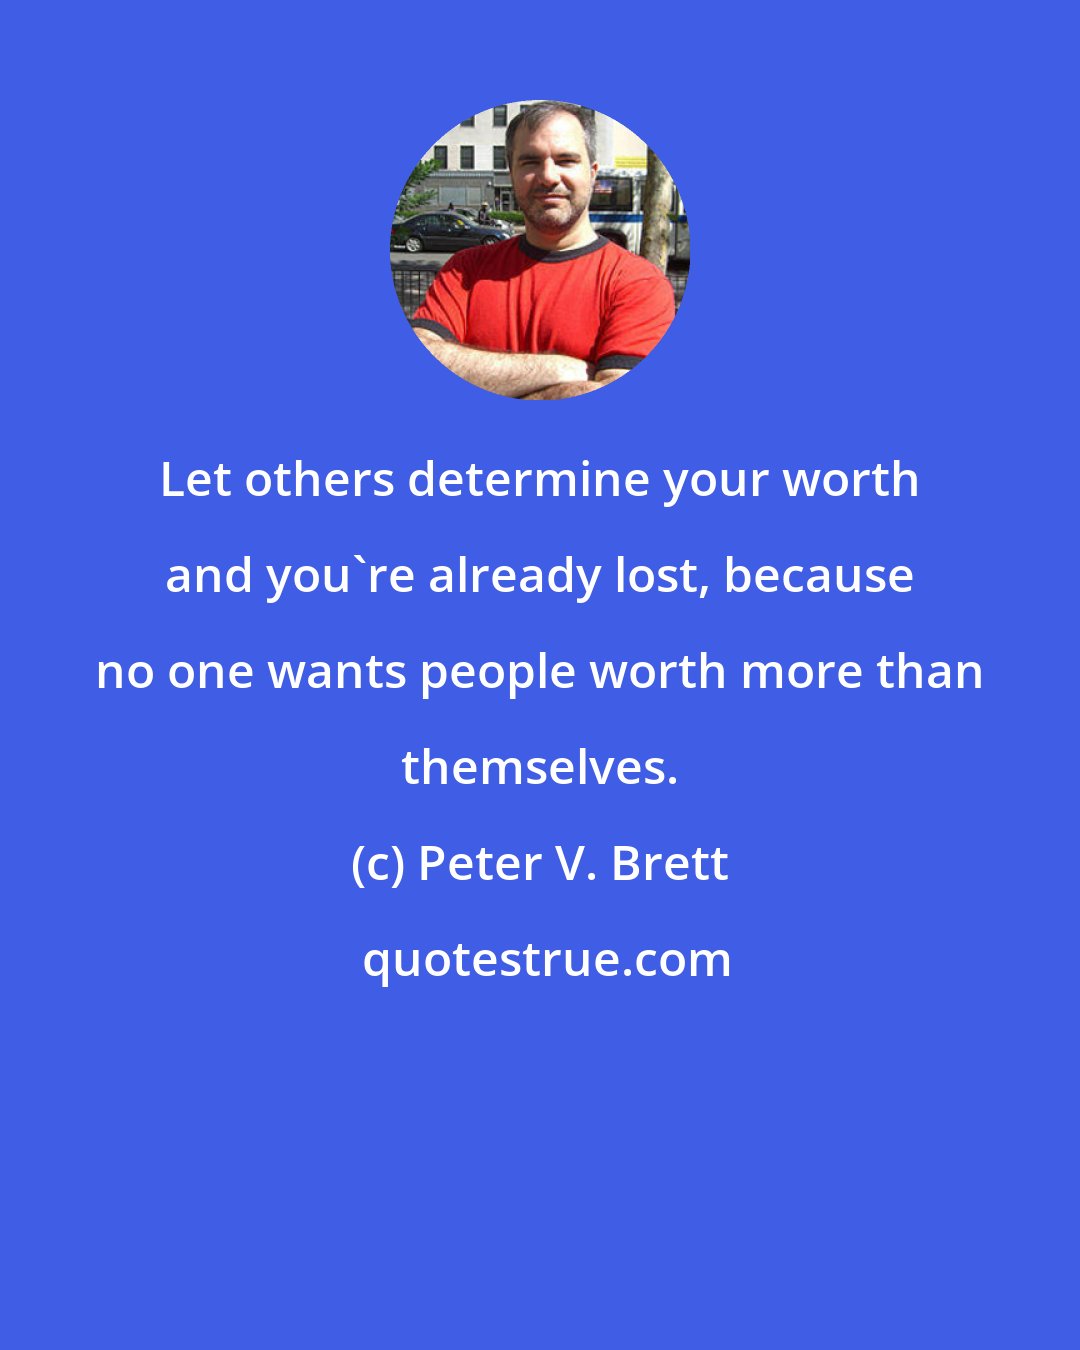 Peter V. Brett: Let others determine your worth and you're already lost, because no one wants people worth more than themselves.